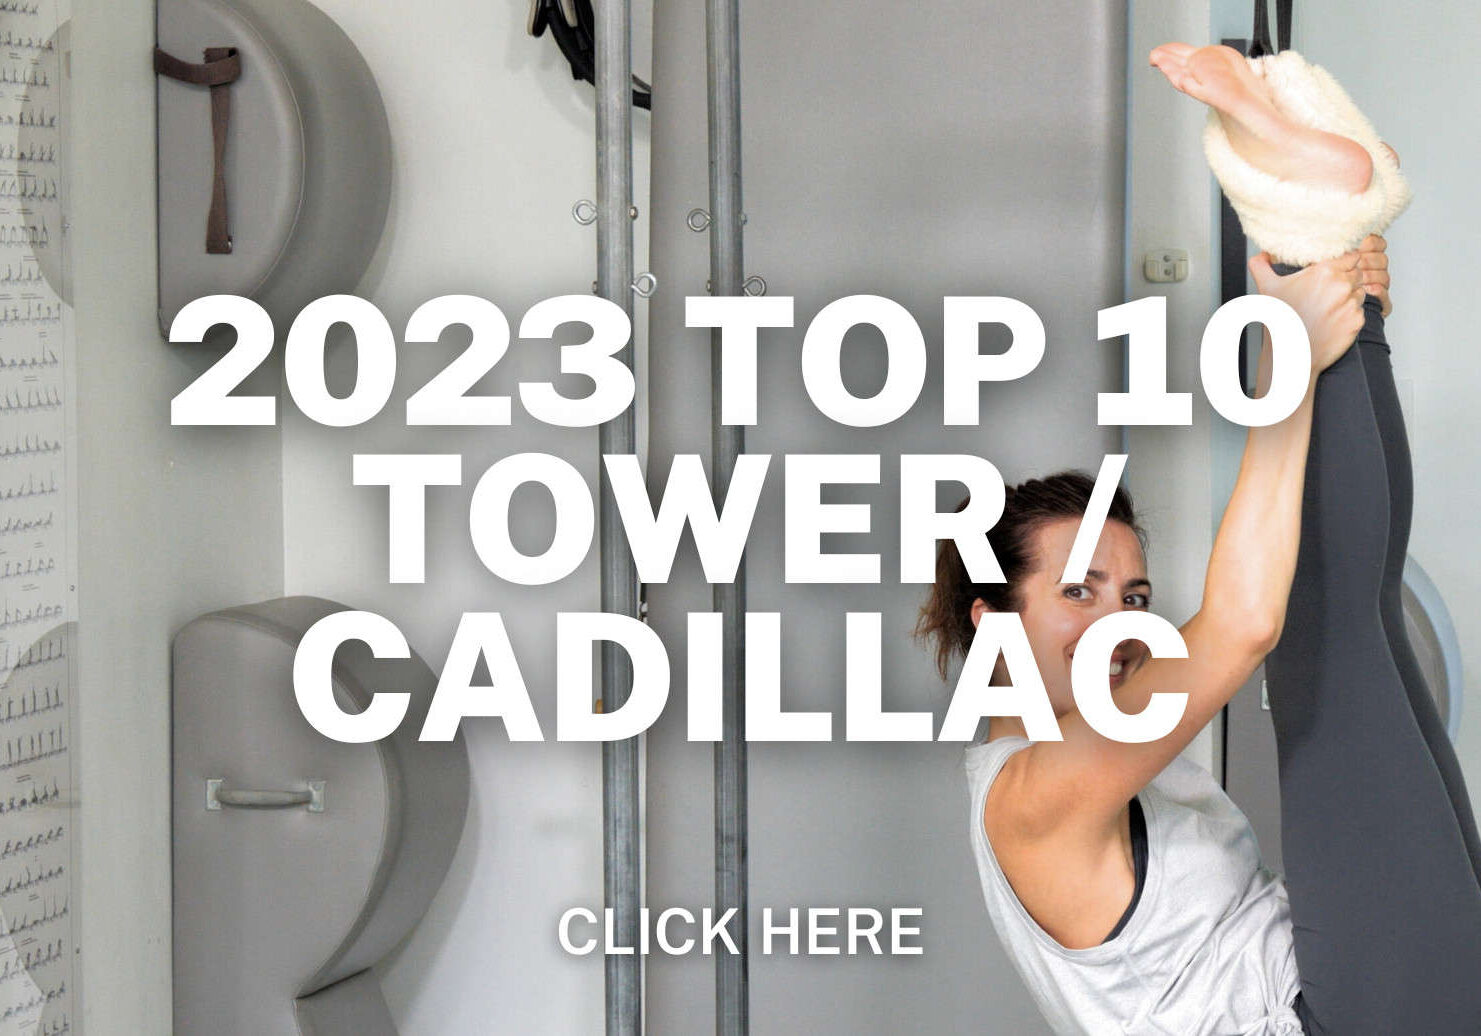 Click here for 2023 Top 10 Tower / Cadillac